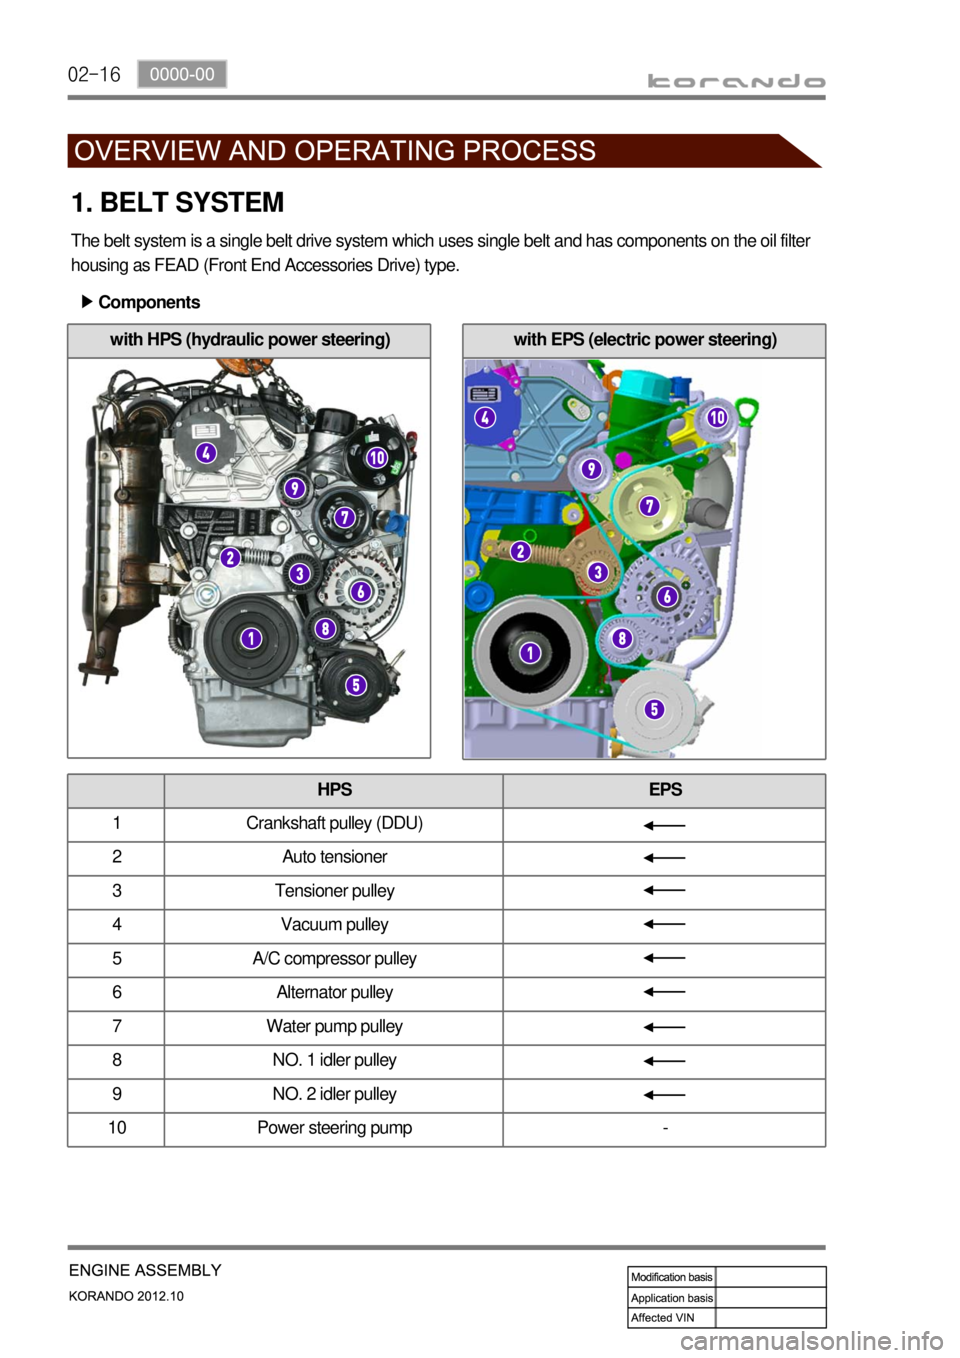 SSANGYONG KORANDO 2012  Service Manual 02-16
with EPS (electric power steering)
1. BELT SYSTEM
The belt system is a single belt drive system which uses single belt and has components on the oil filter 
housing as FEAD (Front End Accessorie